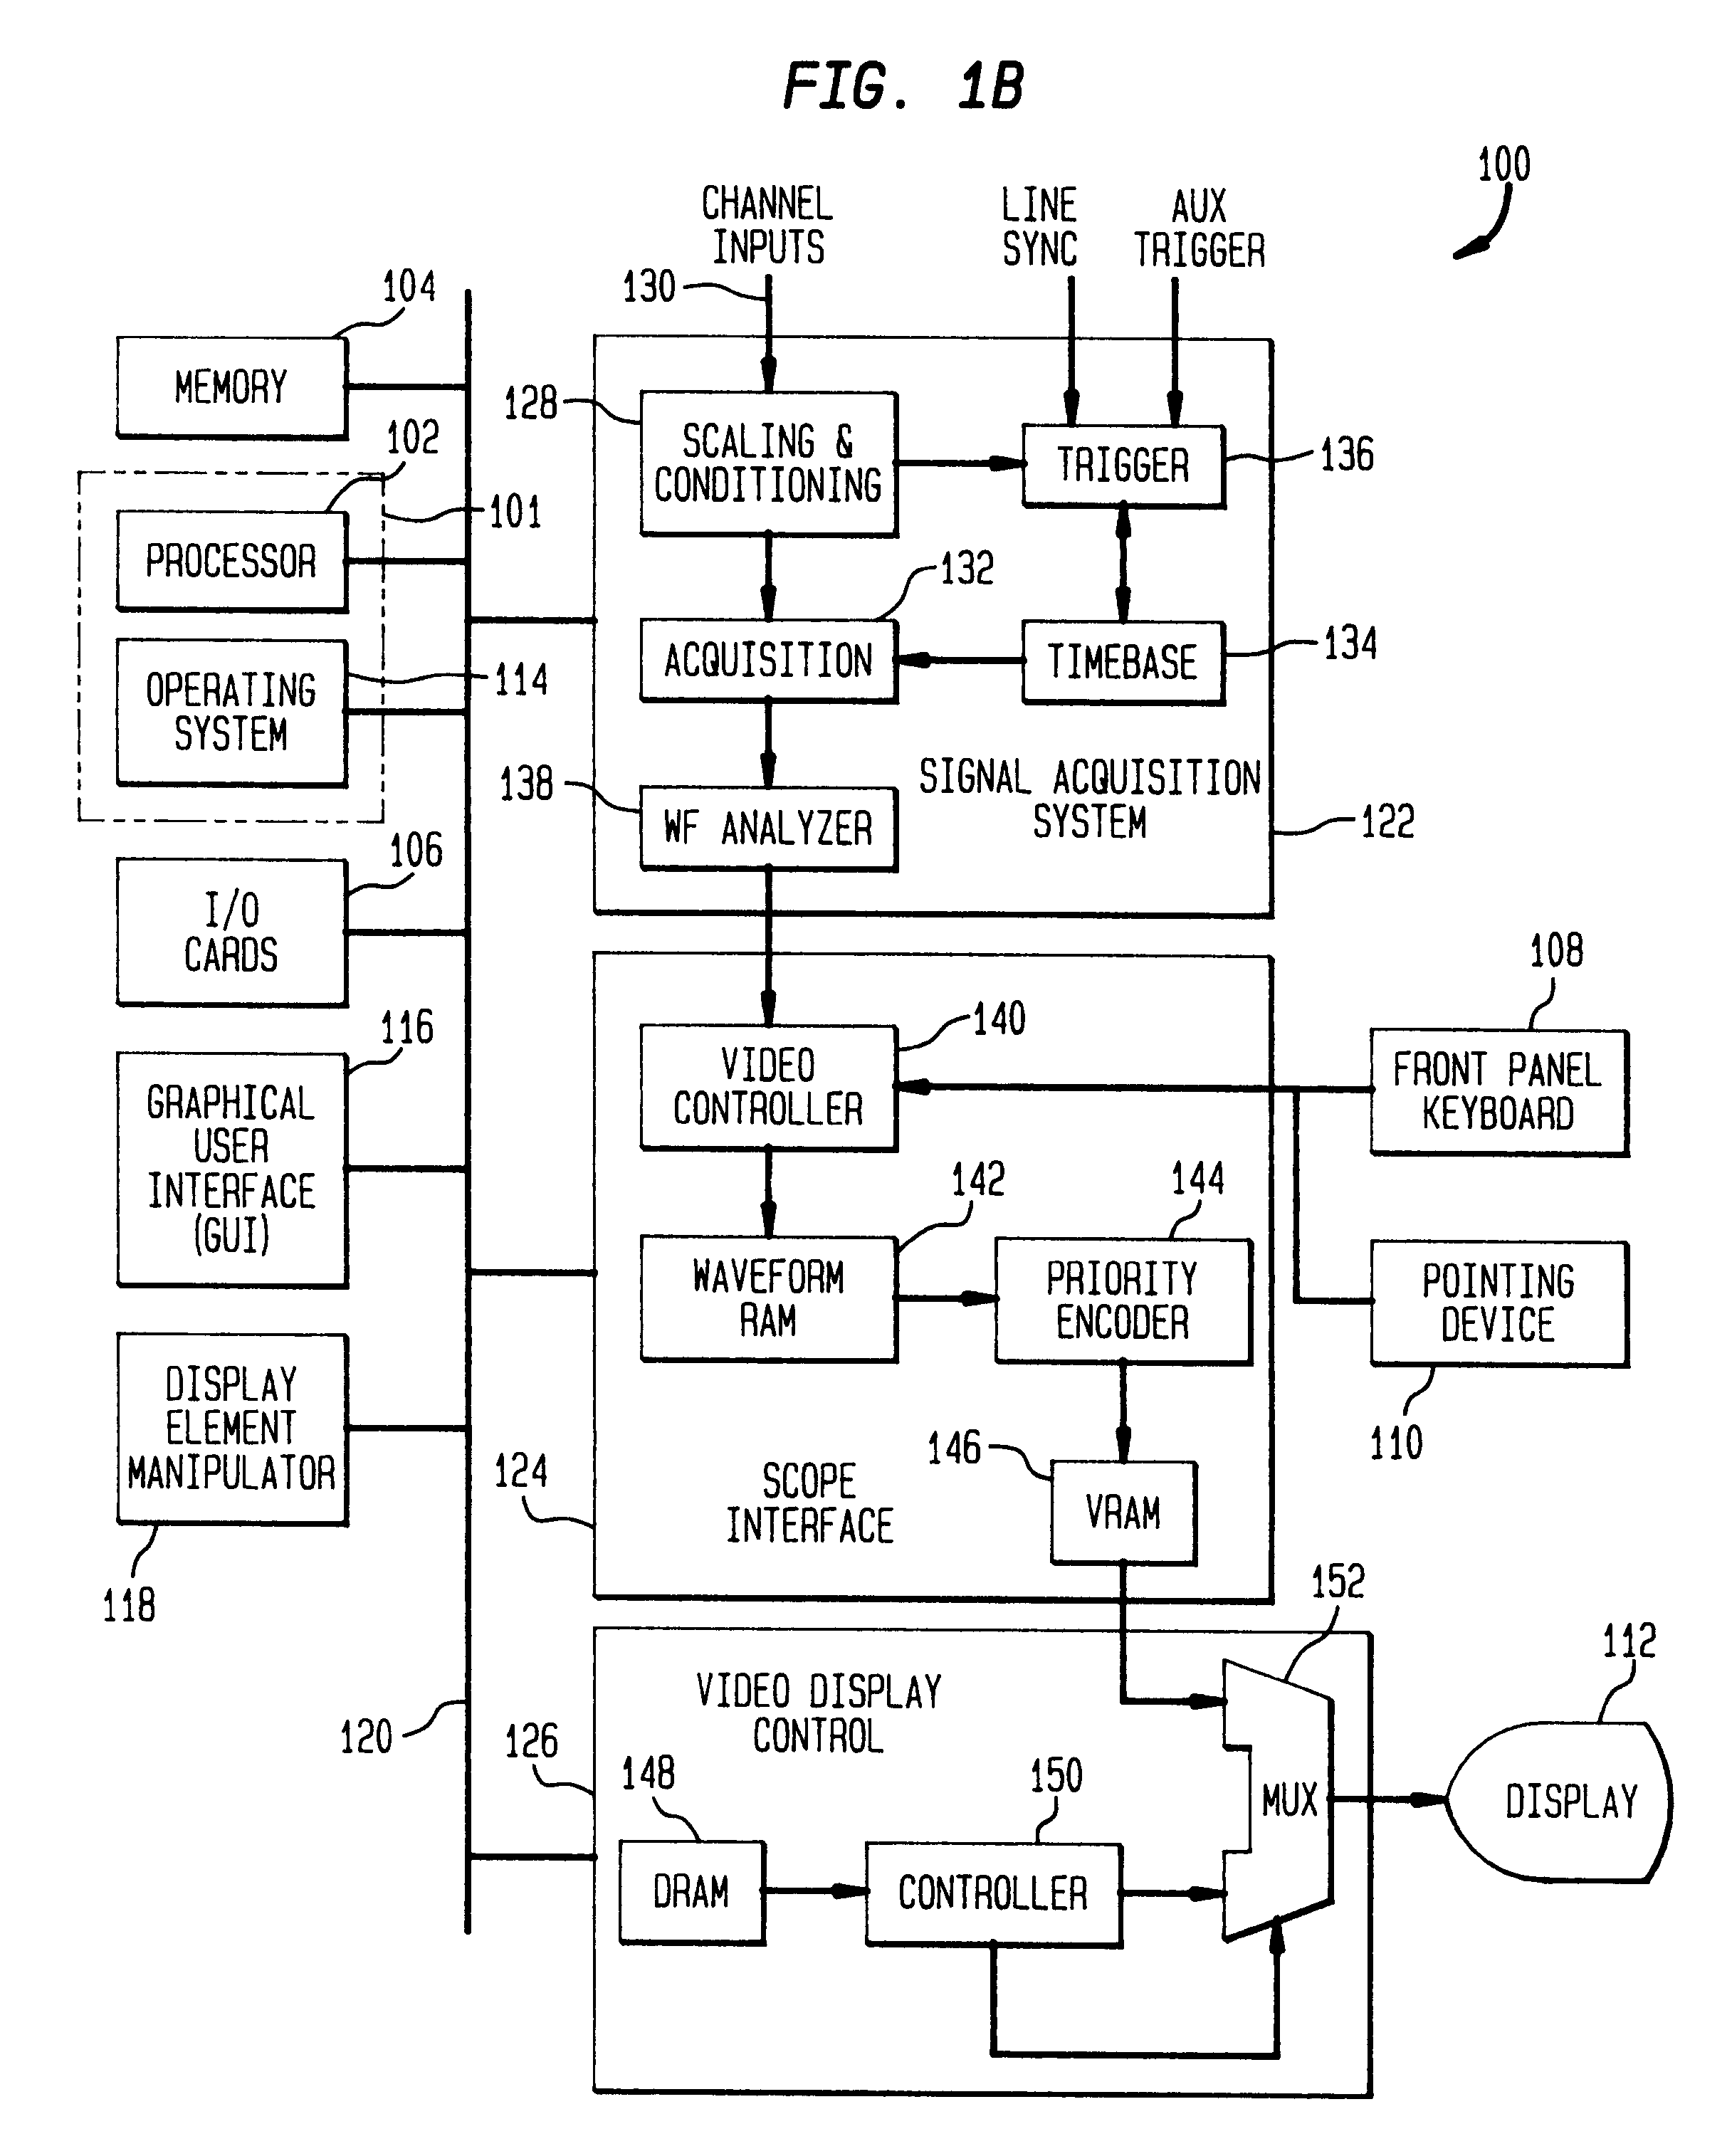 System and method for graphically manipulating display elements in a computer-based system